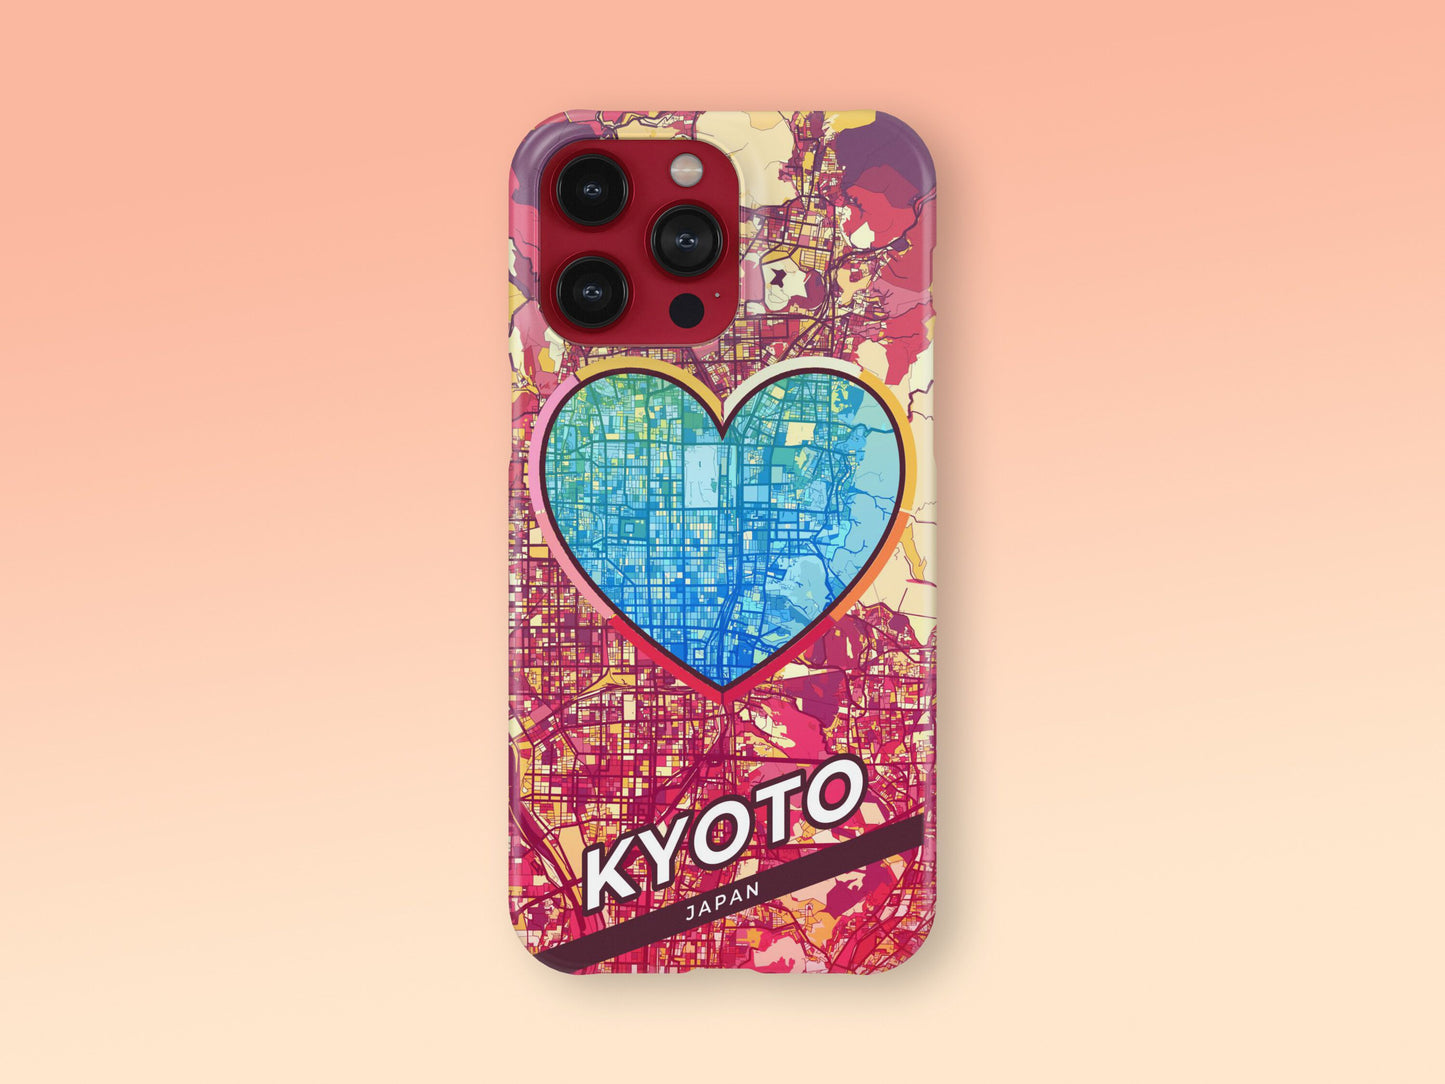 Kyoto Japan slim phone case with colorful icon. Birthday, wedding or housewarming gift. Couple match cases. 2